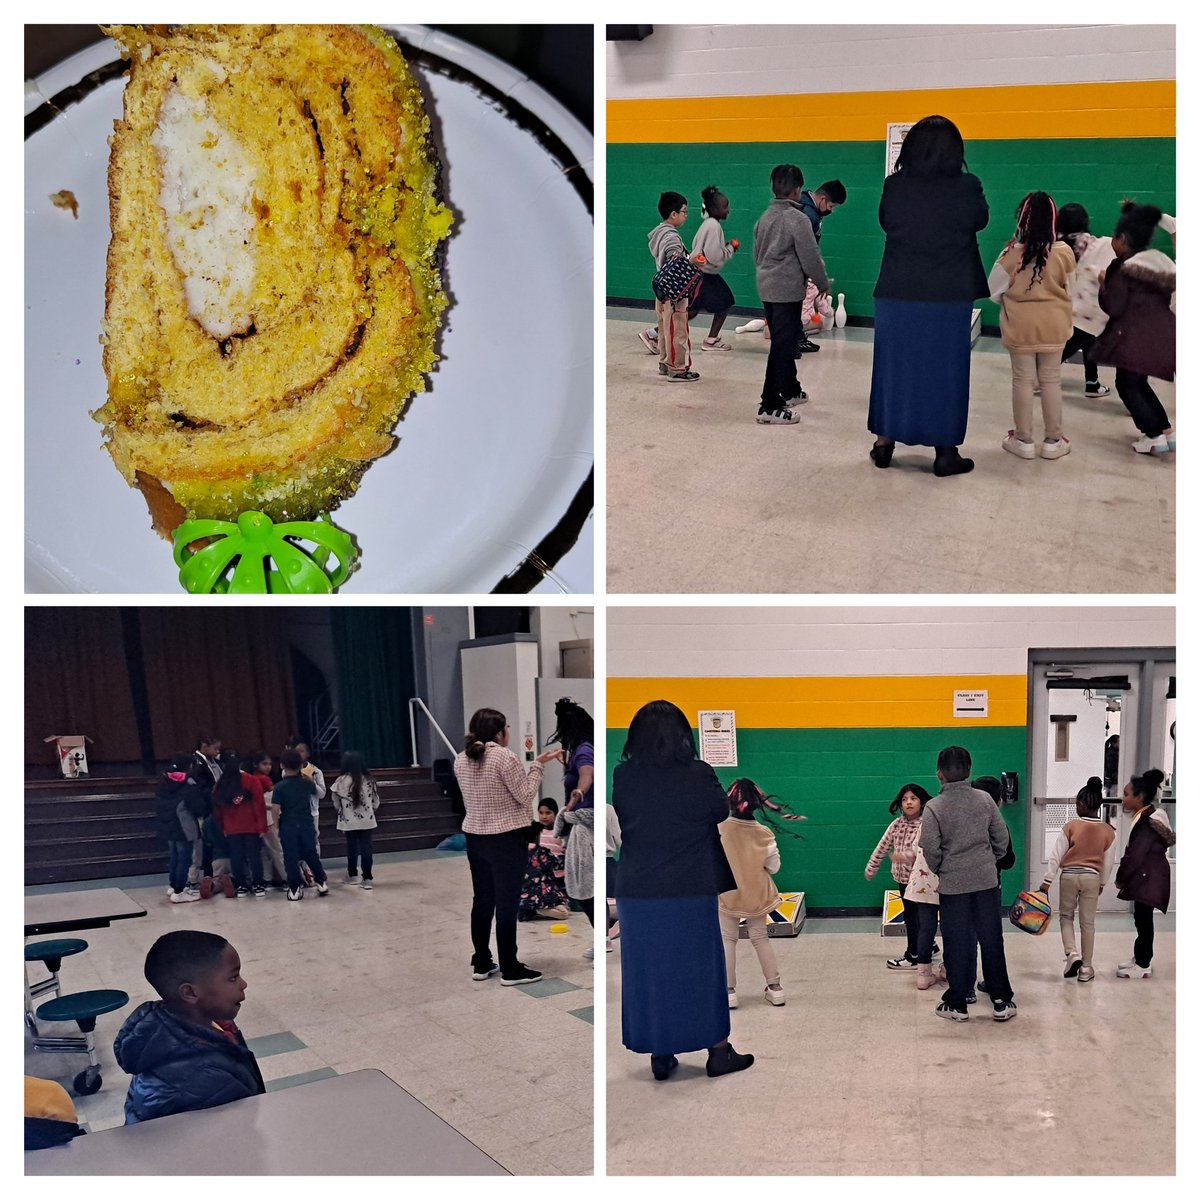 Ss, staff experienced Mardi Gras @PleasantvilleES with a tailgate hosted by @HISDNutrition along with music and games and even King Cake as well from Principal @ArymasRay! #SEL moment enjoyed by all as we continue to do the work and keep scholars growing academically! 🐅💚💛